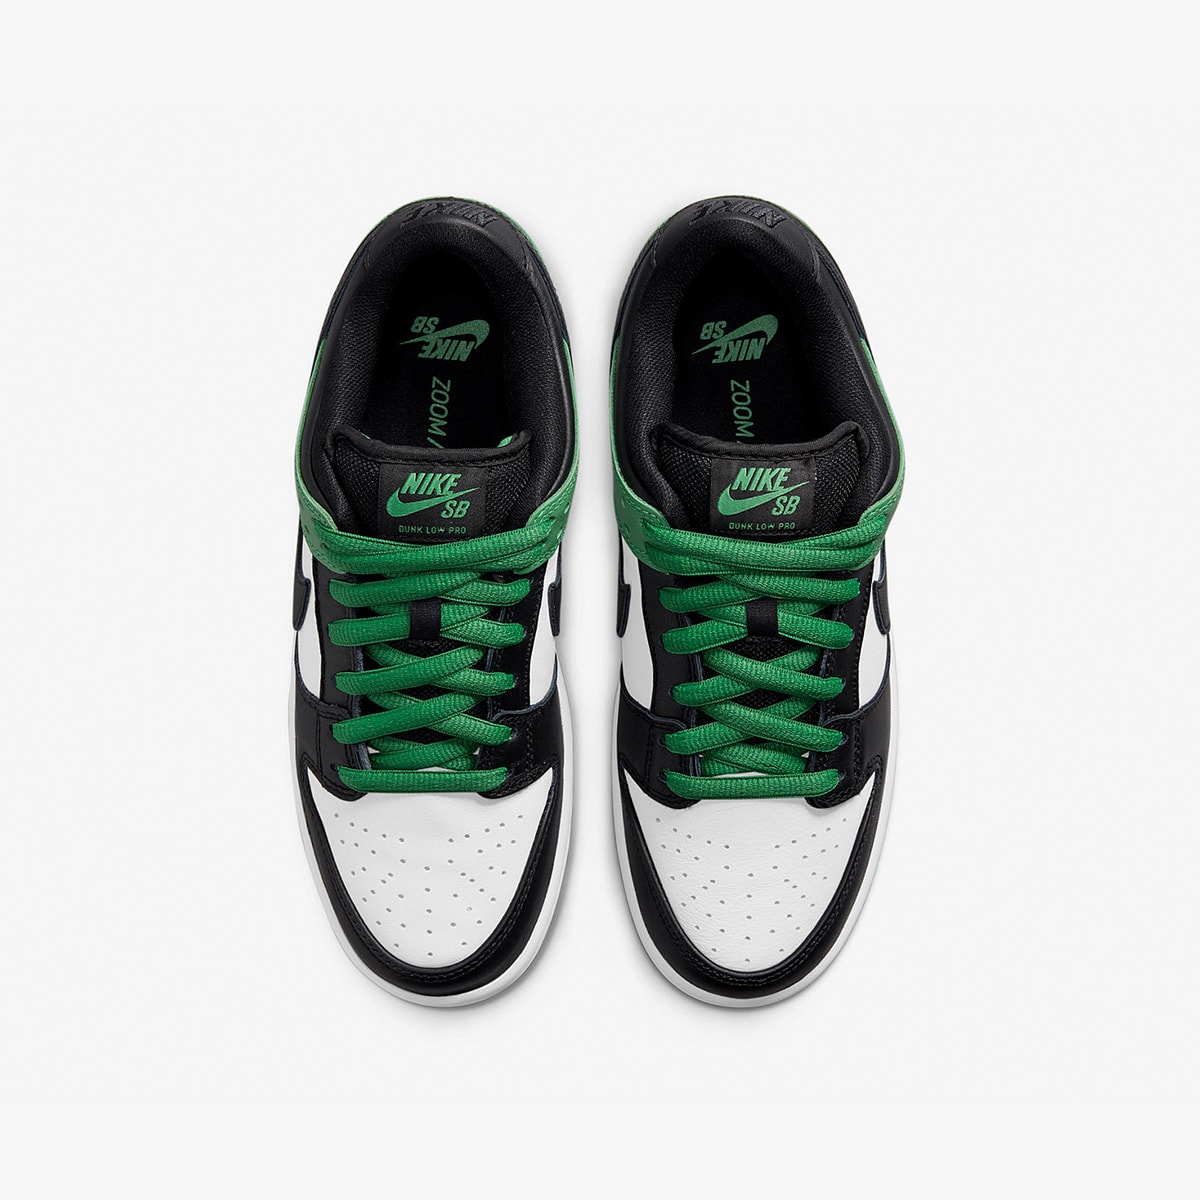 Nike SB Dunk Low Pro (Classic Green, Black & White) | END. Launches